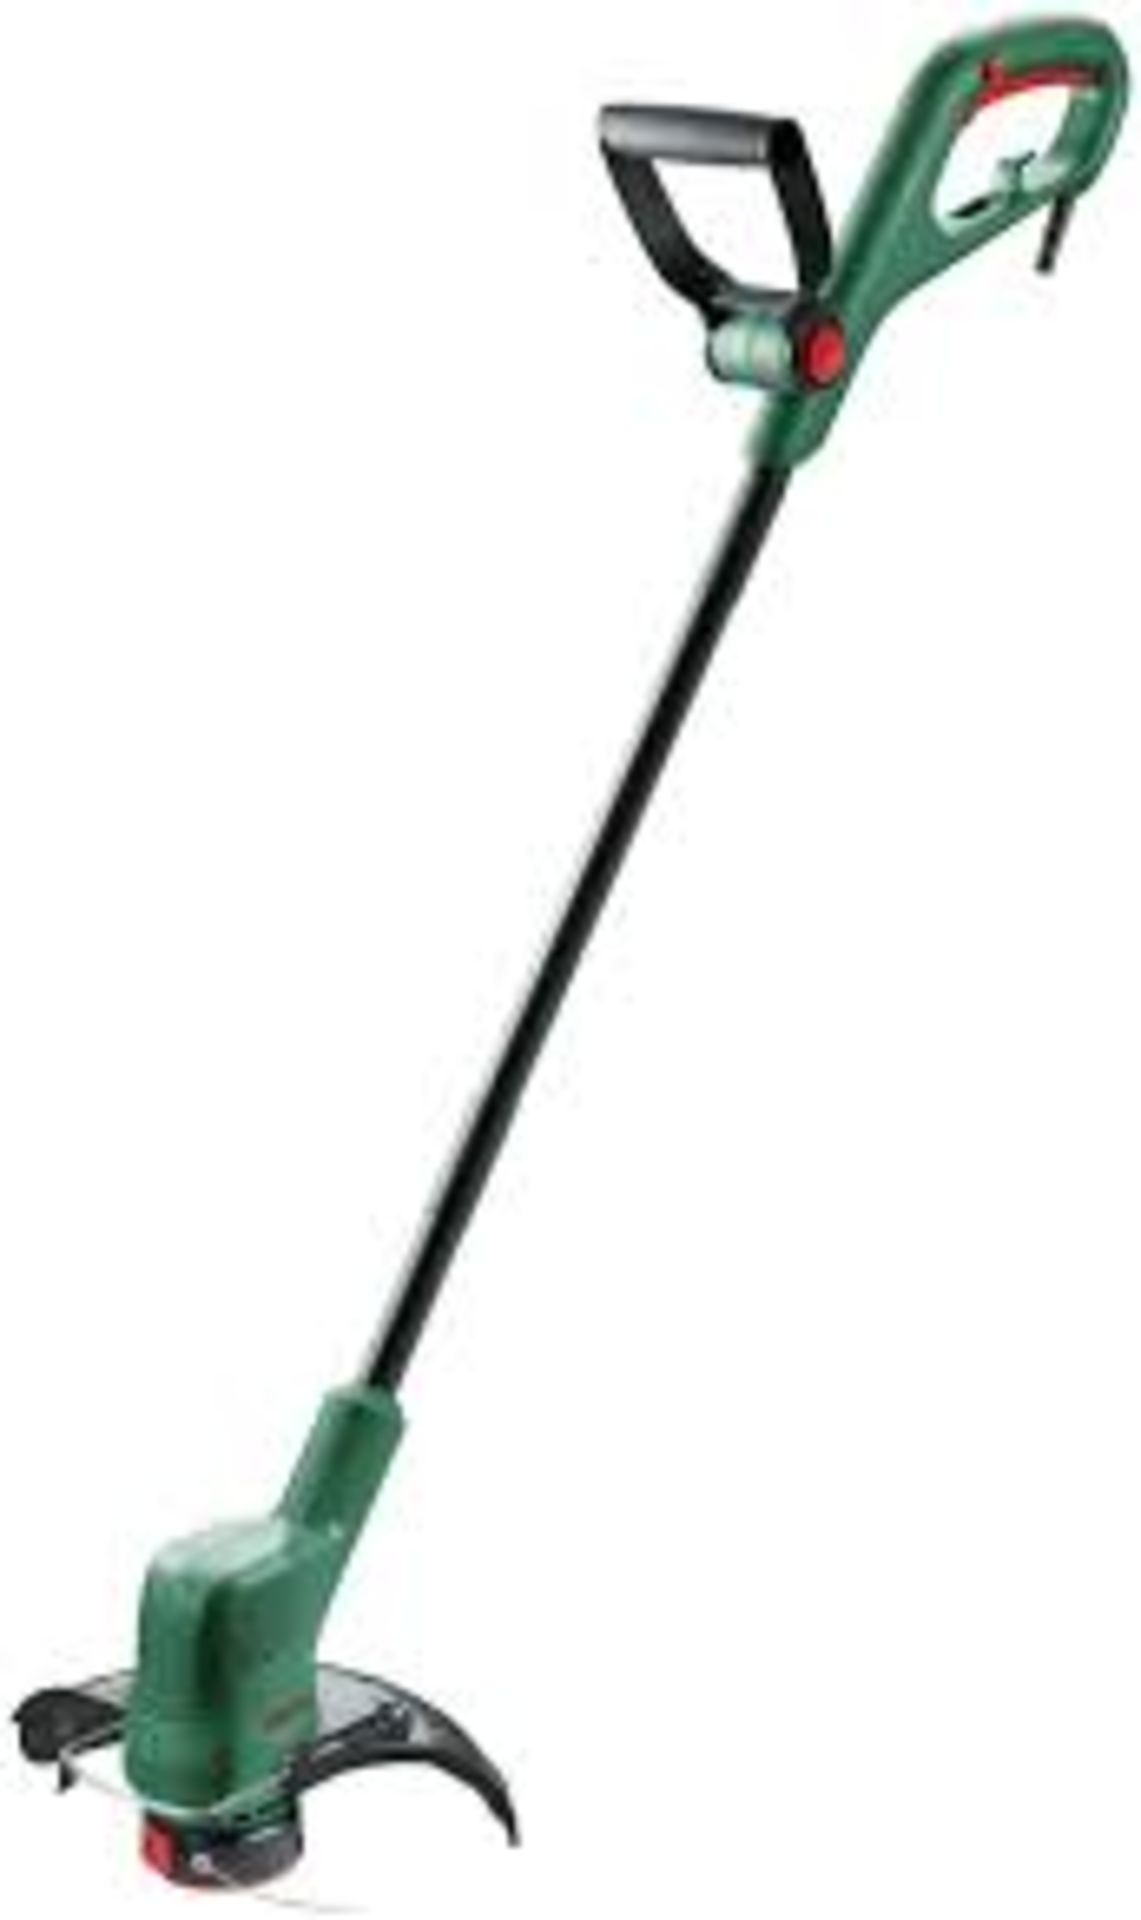 Bosch EasyGrassCut 26 280W Corded Grass trimmer. - PW. The ideal choice for comfortable trimming and